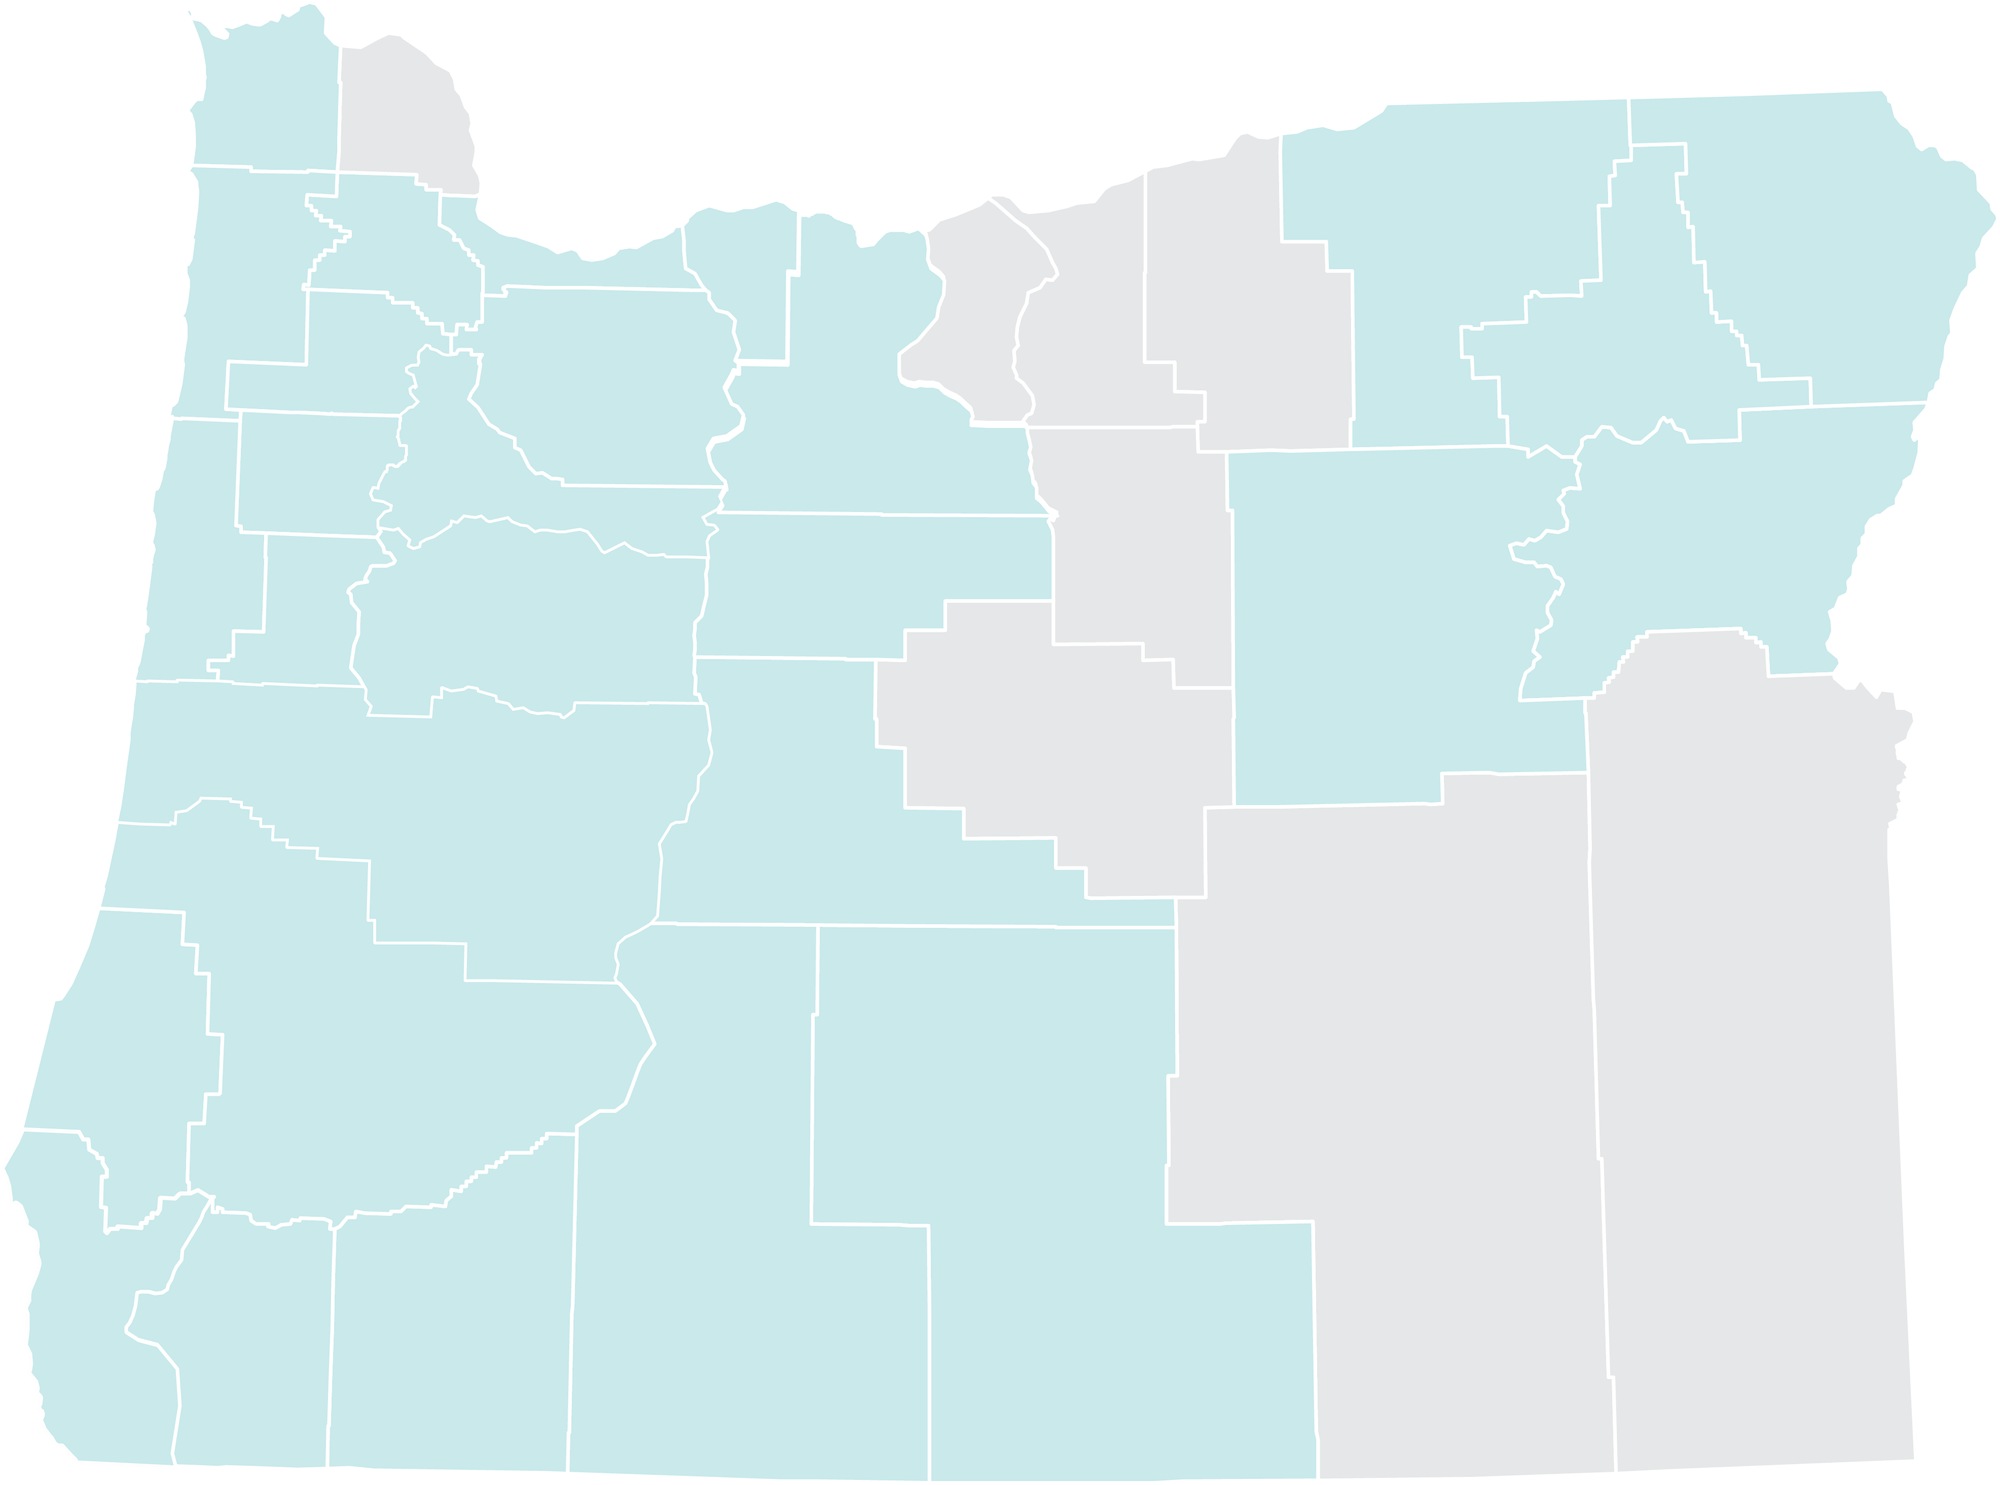 Oregon counties where thimbleberry grows map showing western Oregon, central Oregon and northeast counties